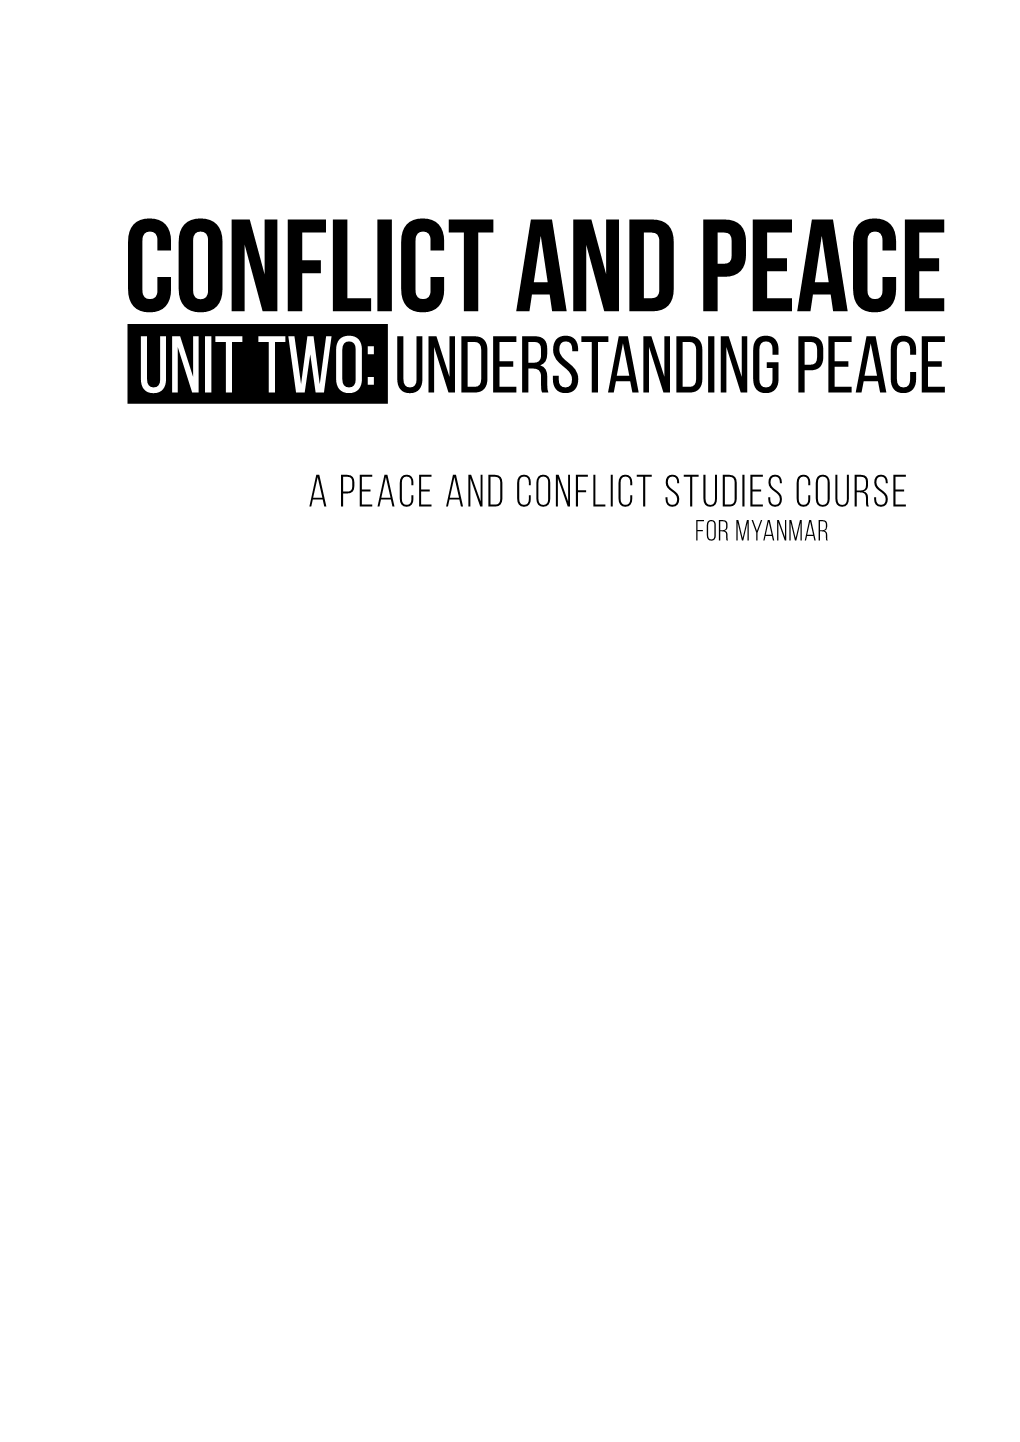 Conflict and Peace Unit Two: Understanding Peace